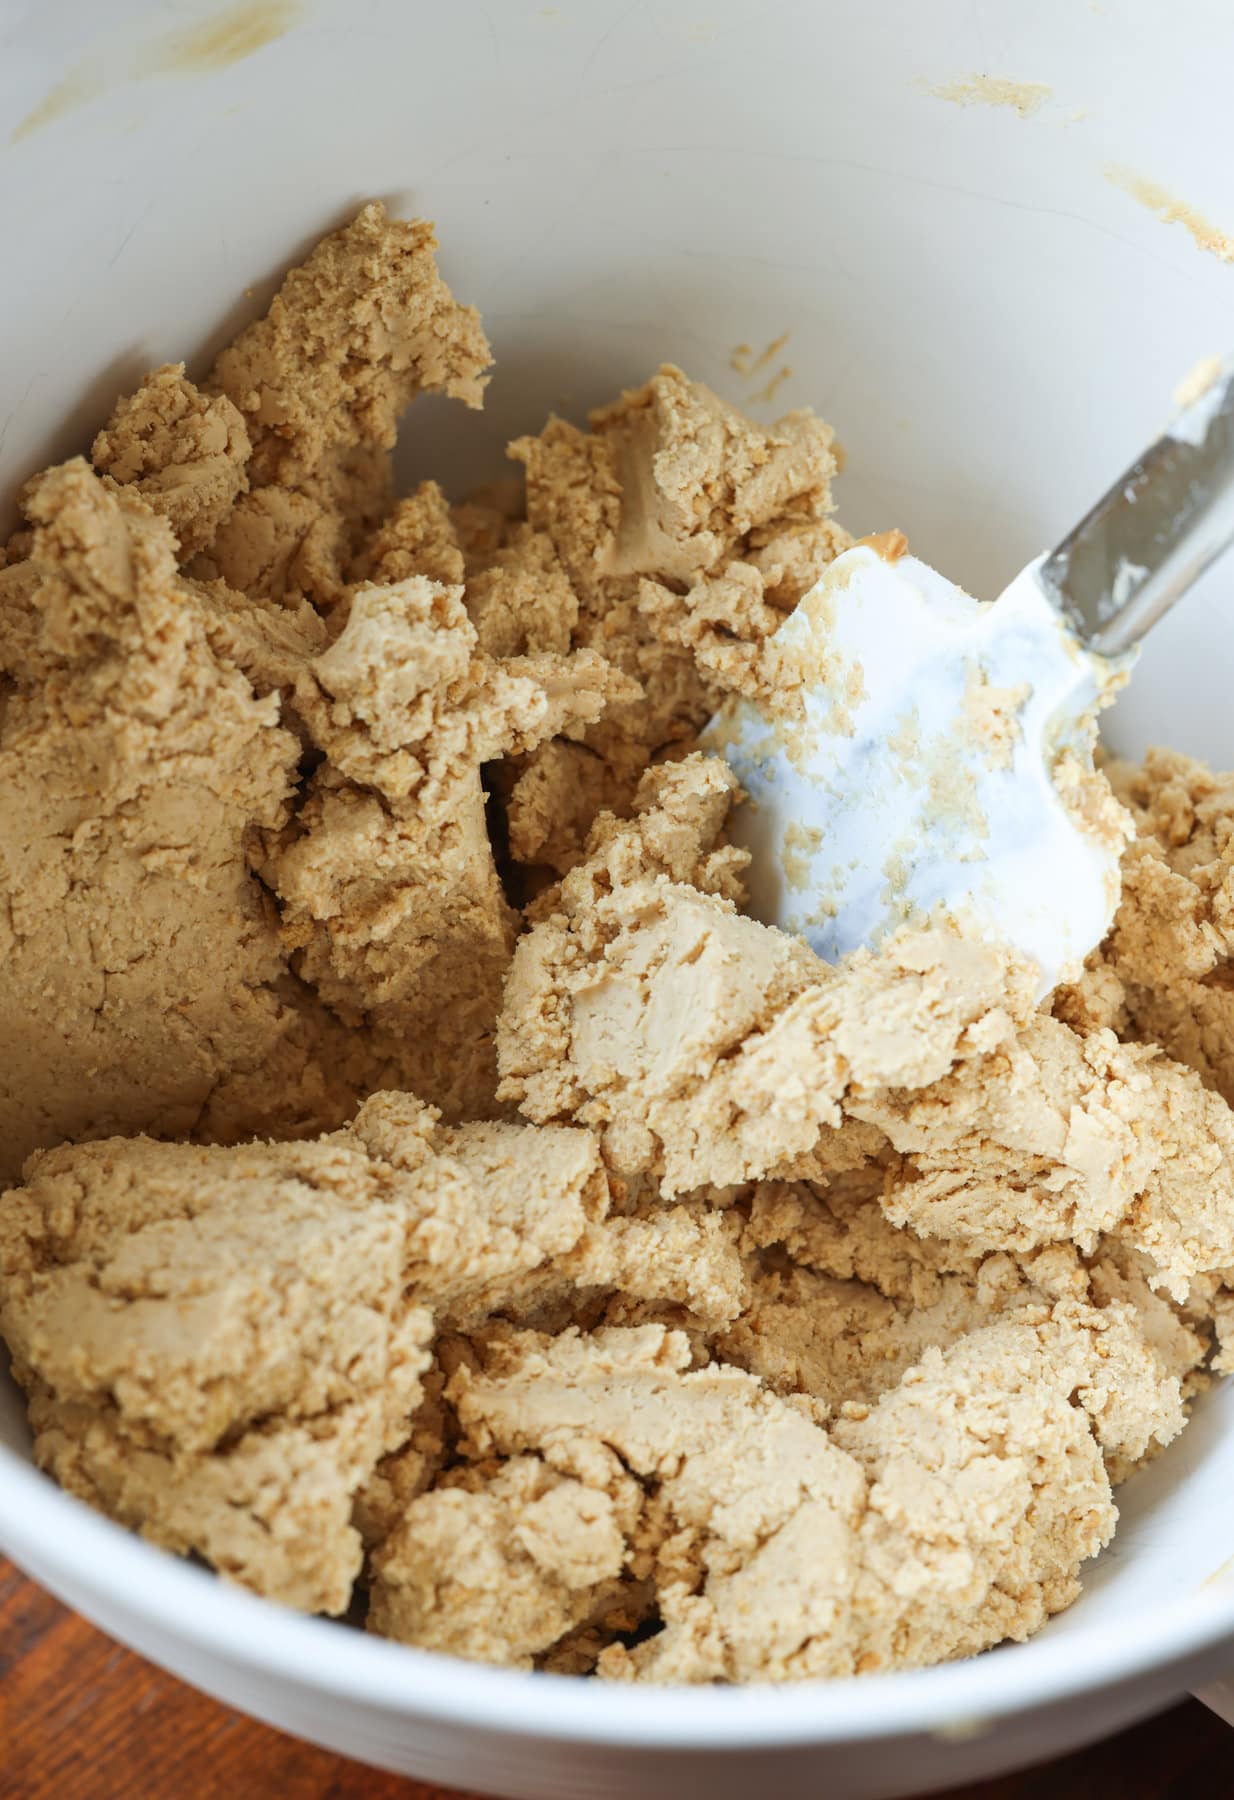 Peanut Butter and powdered sugar mixture in a white mixing bowl with a rubber spatula